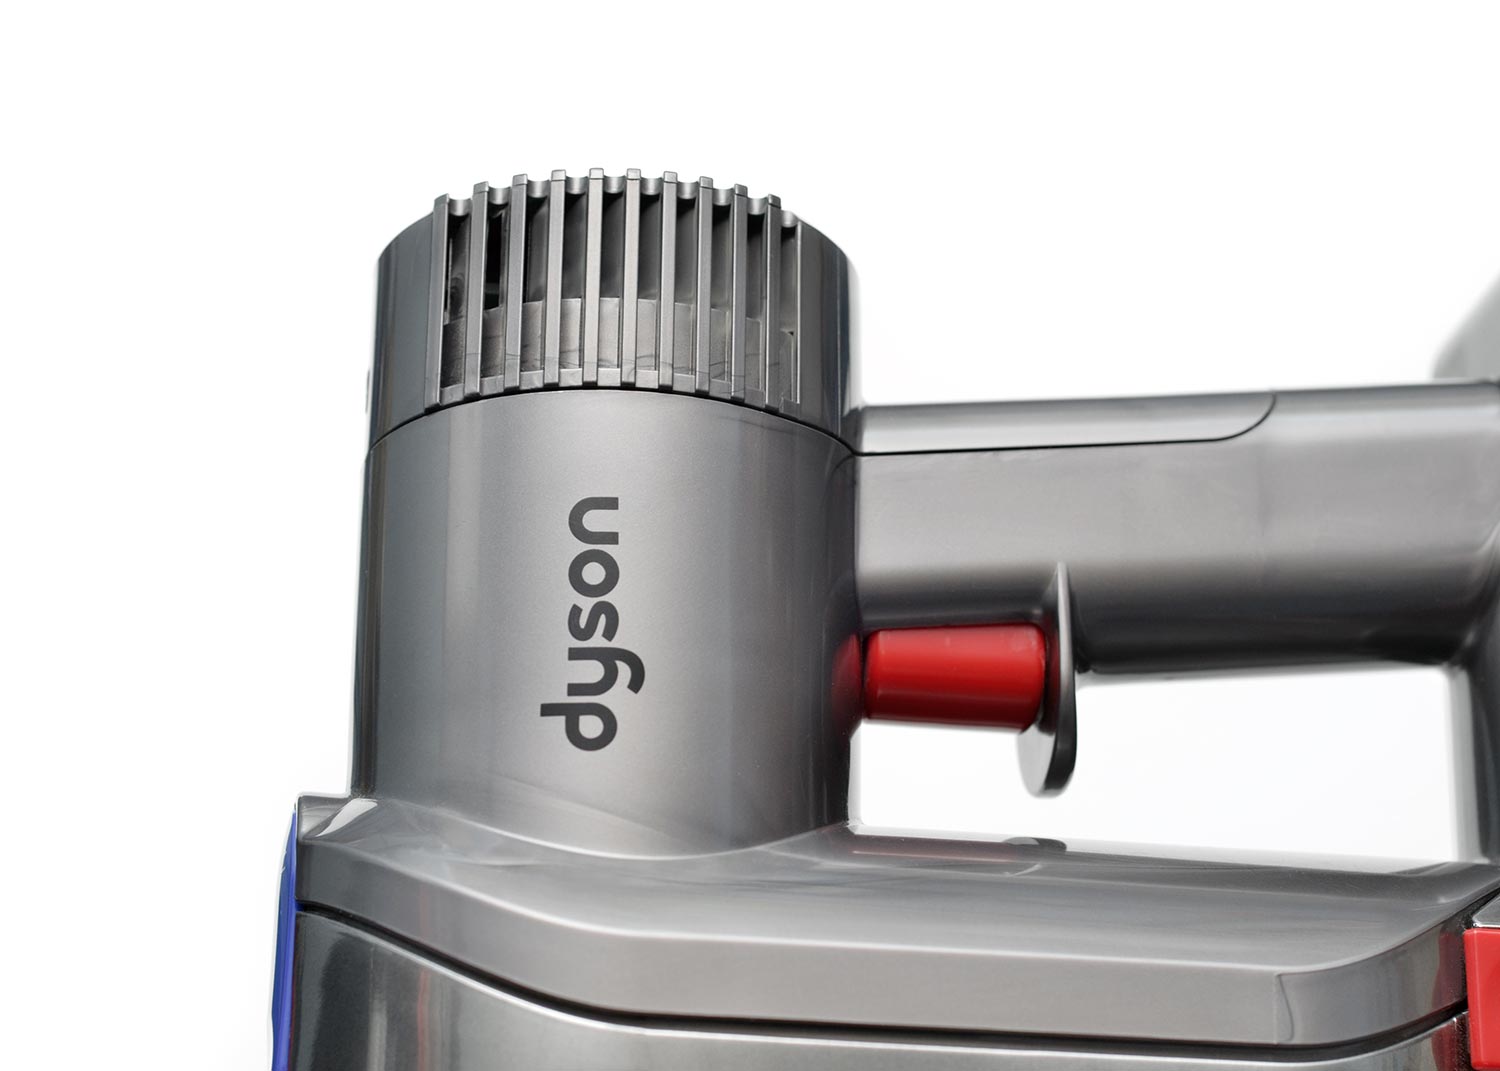 Dyson is a British company known for it's vacuum cleaners and hand dryers